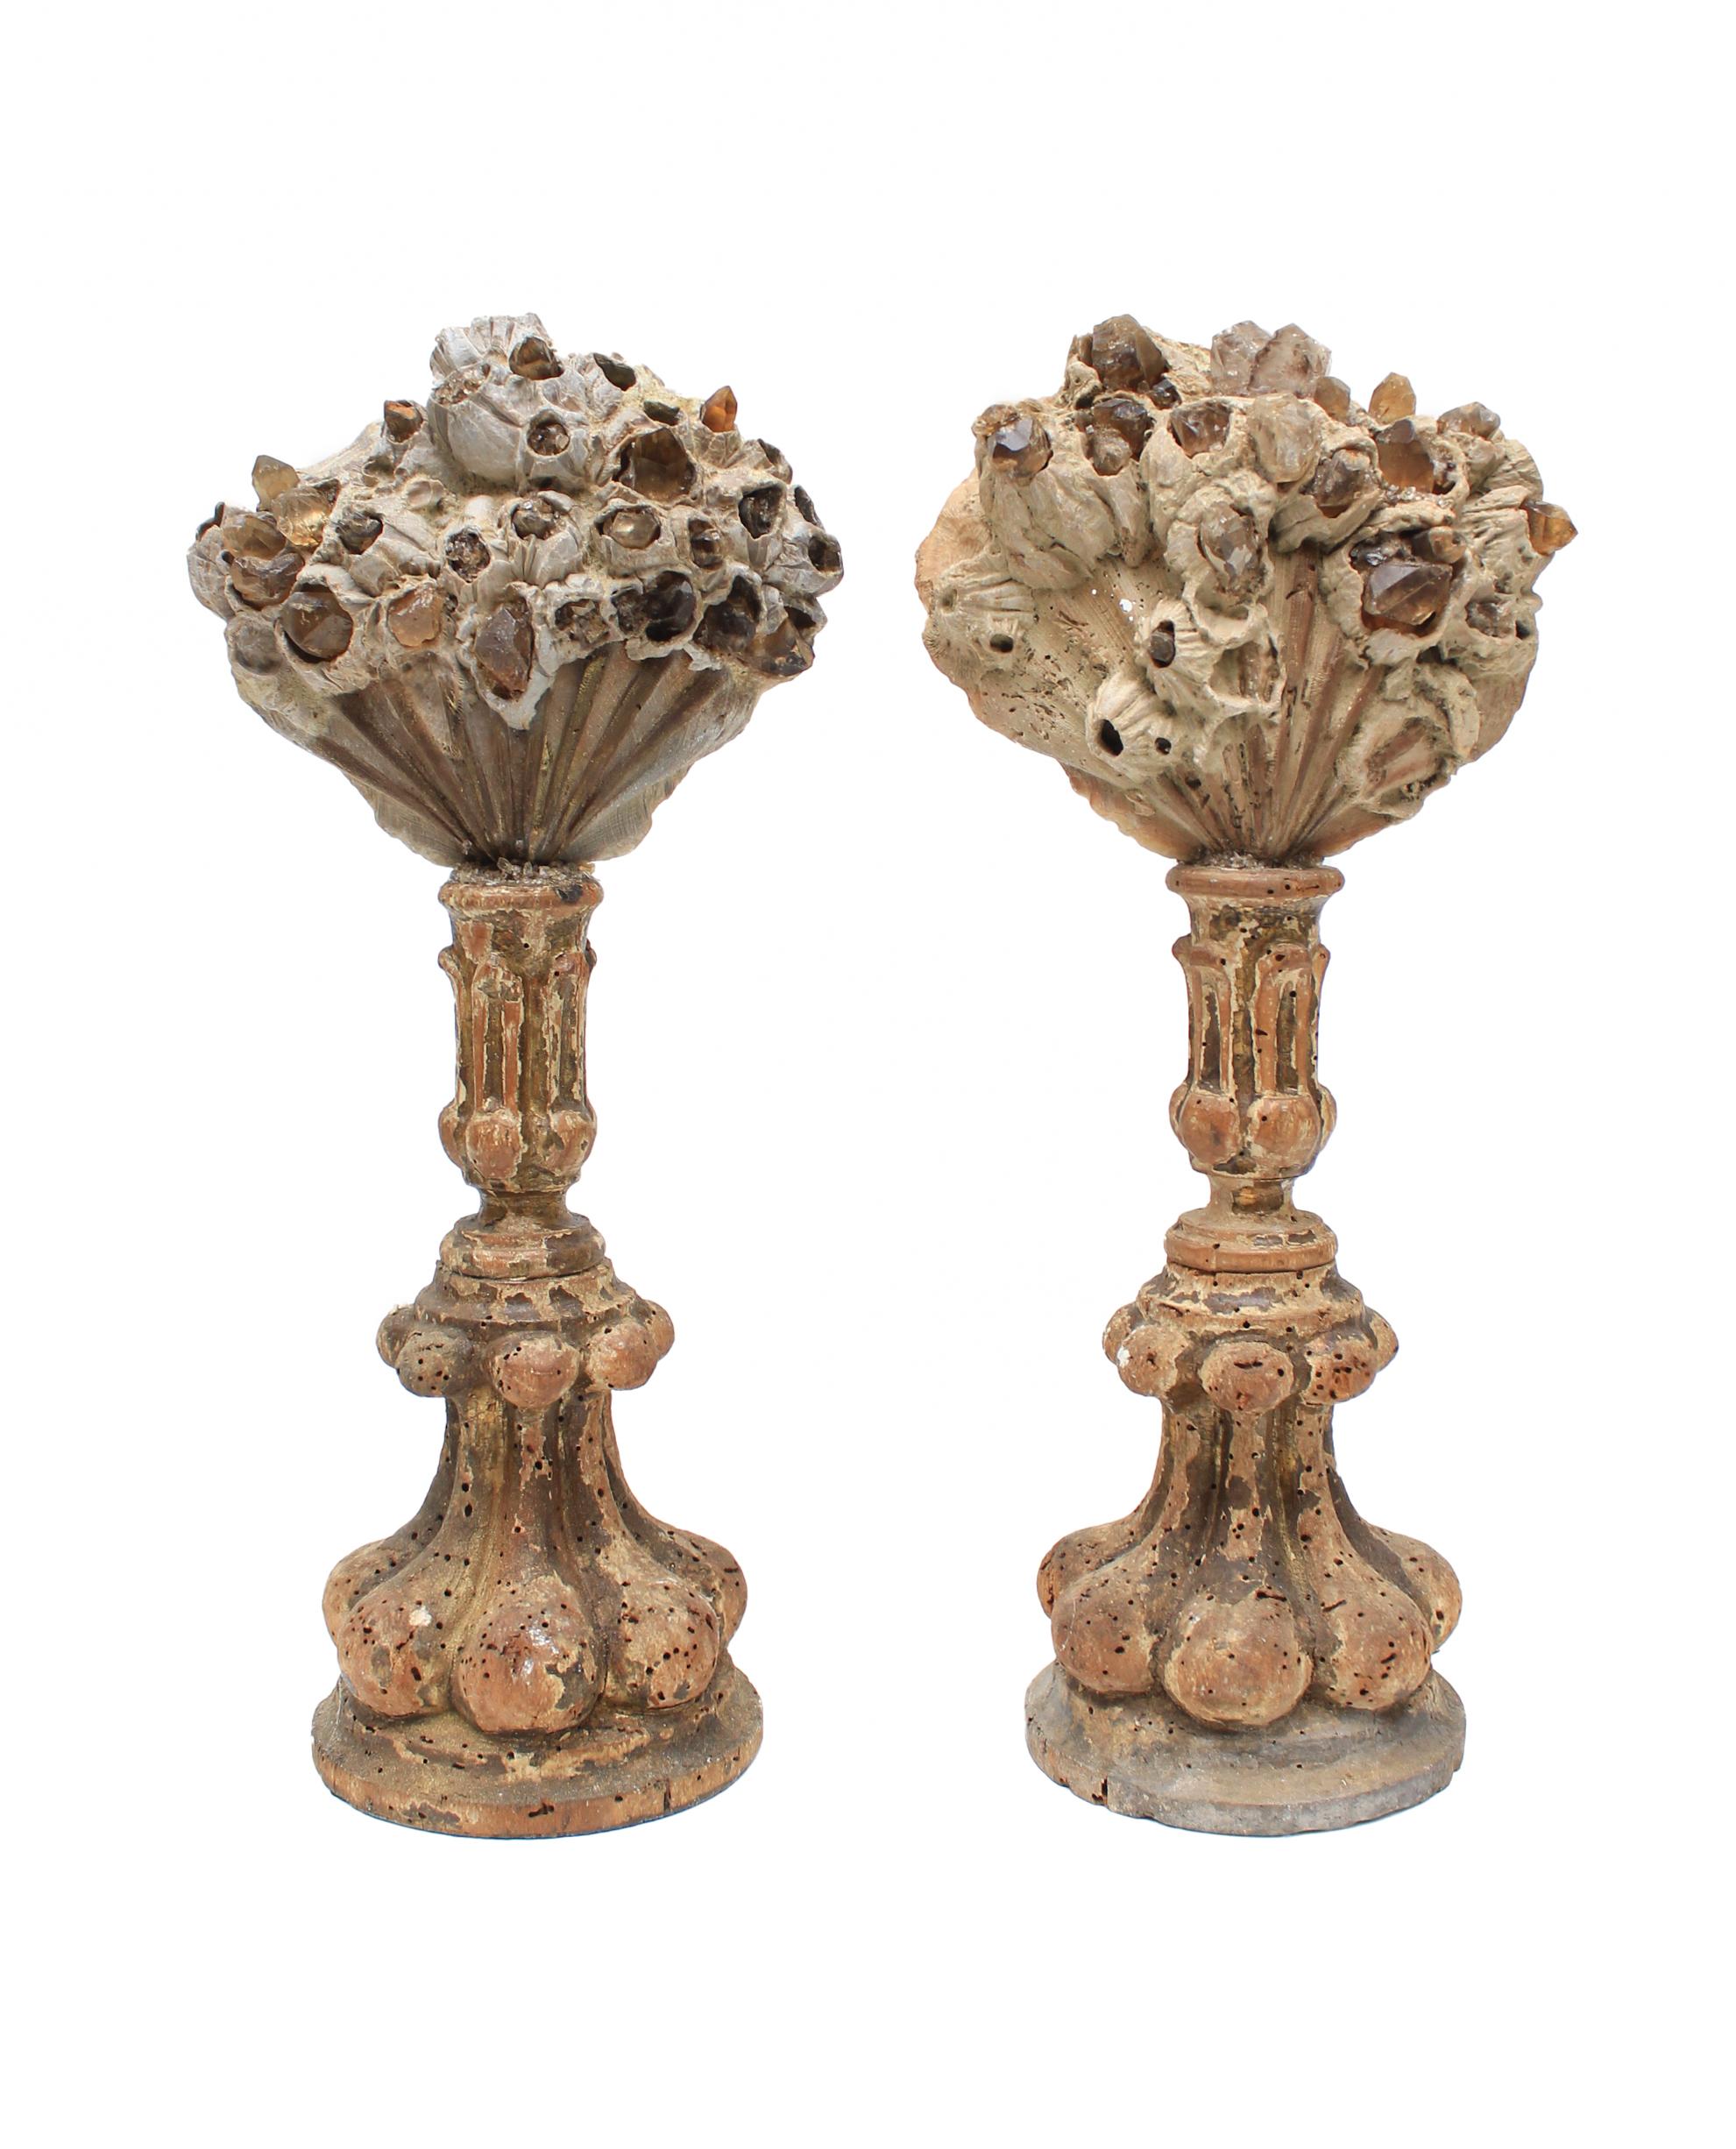 Pair of 17th century Italian candlesticks with Chesapecten shells and adorned with smoky quartz and Herkimer diamonds.

The pair of candlesticks originally came from a church in Tuscany. They are distressed due to period and age. Herkimer diamonds